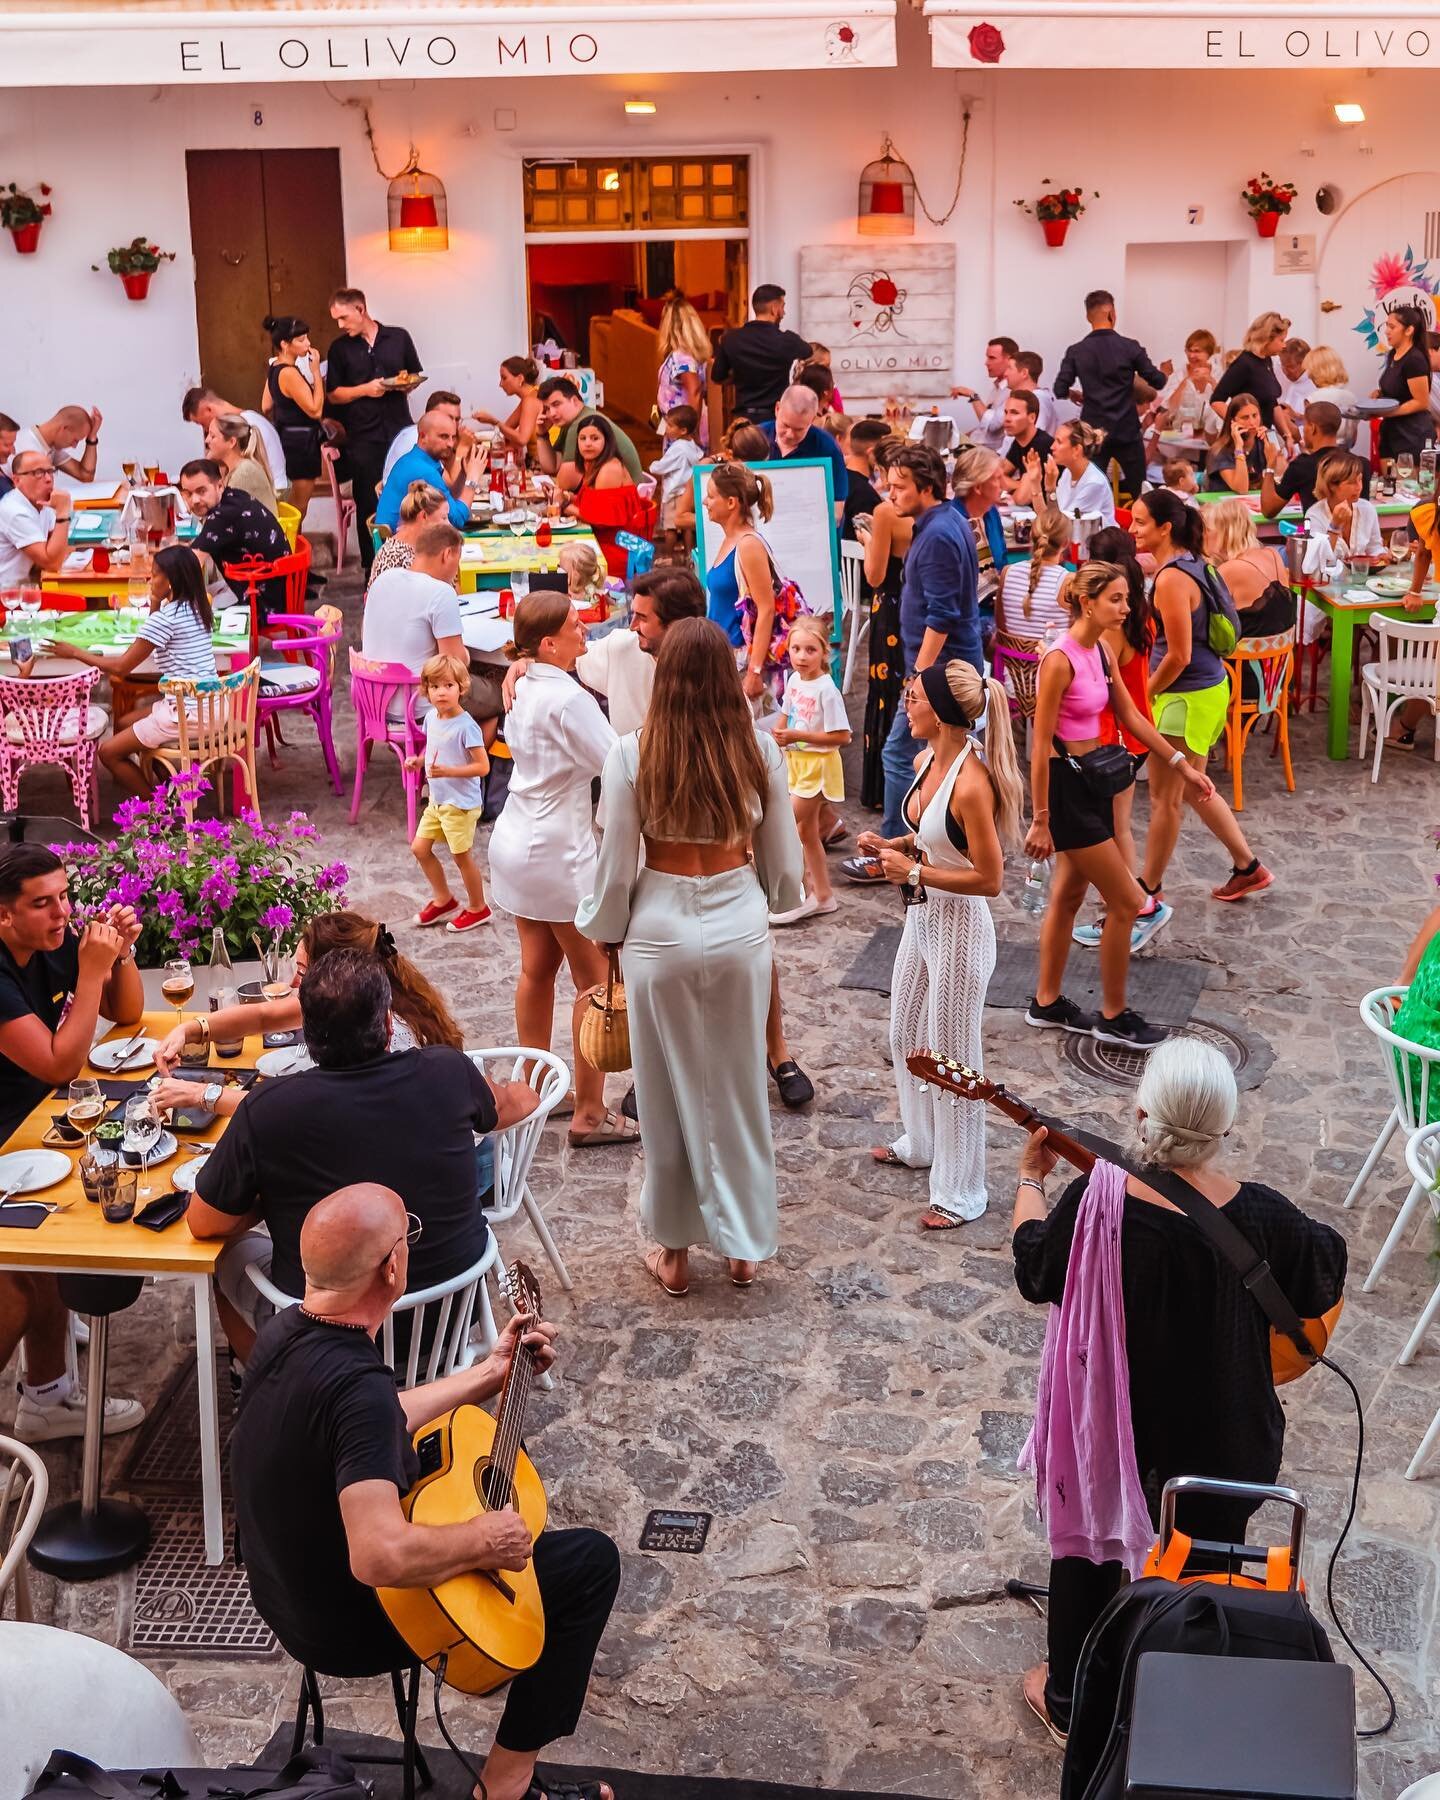 @elolivomioibiza is situated in Dalt Vila, the most beautiful and historic area of Ibiza. You will also enjoy a romantic boho-chic atmosphere with live music ❤️ Book your table now online